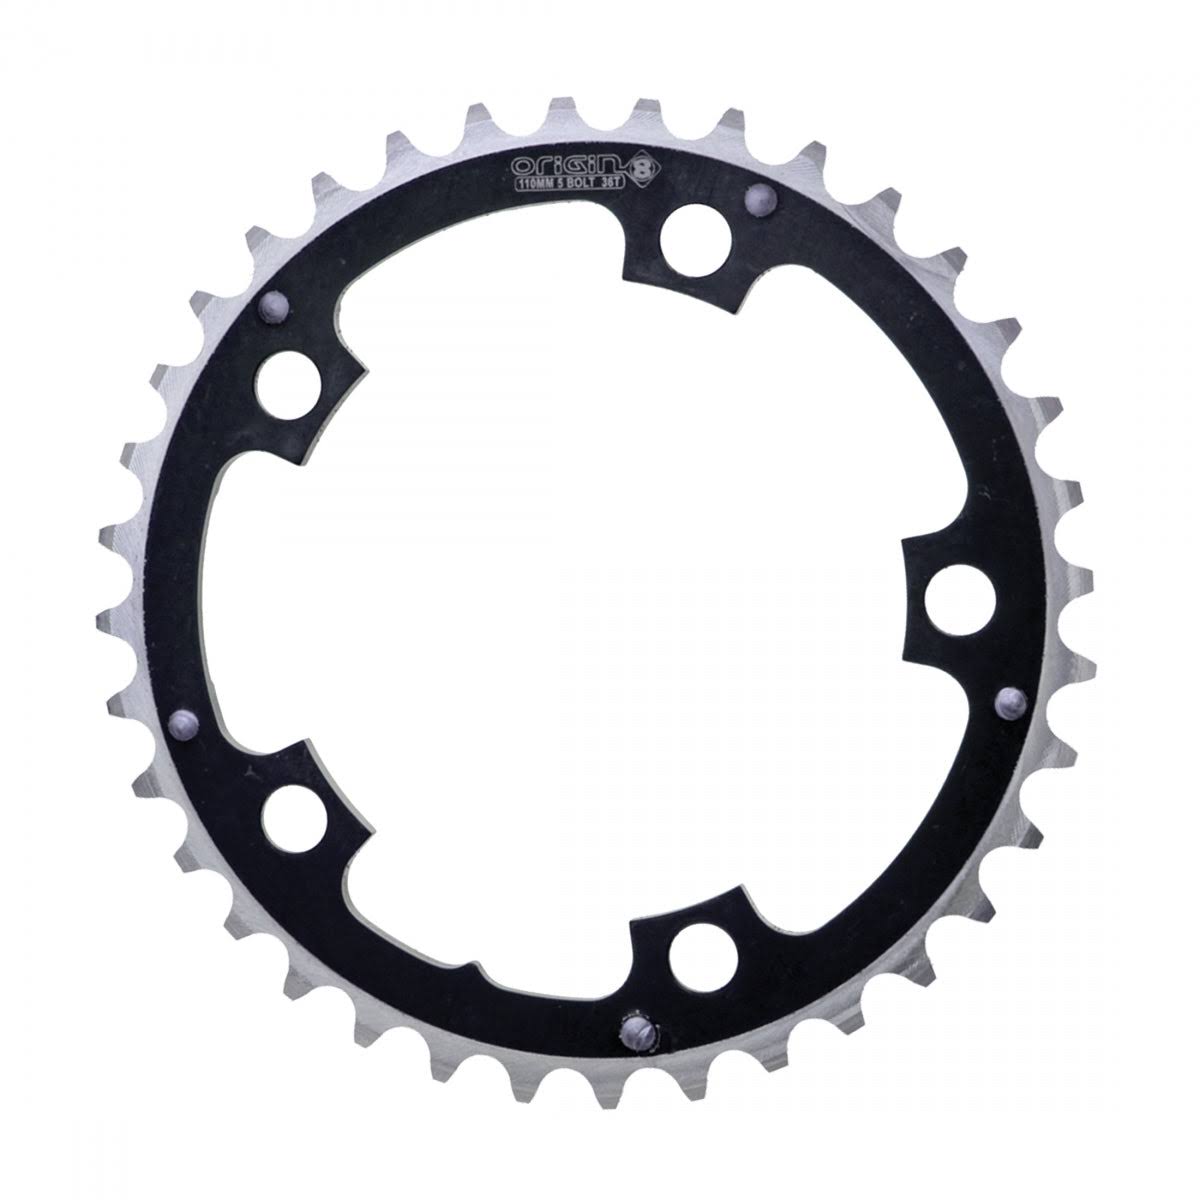 Origin8 Alloy Ramped Chainrings - Black and Silver, 110mm x 36T